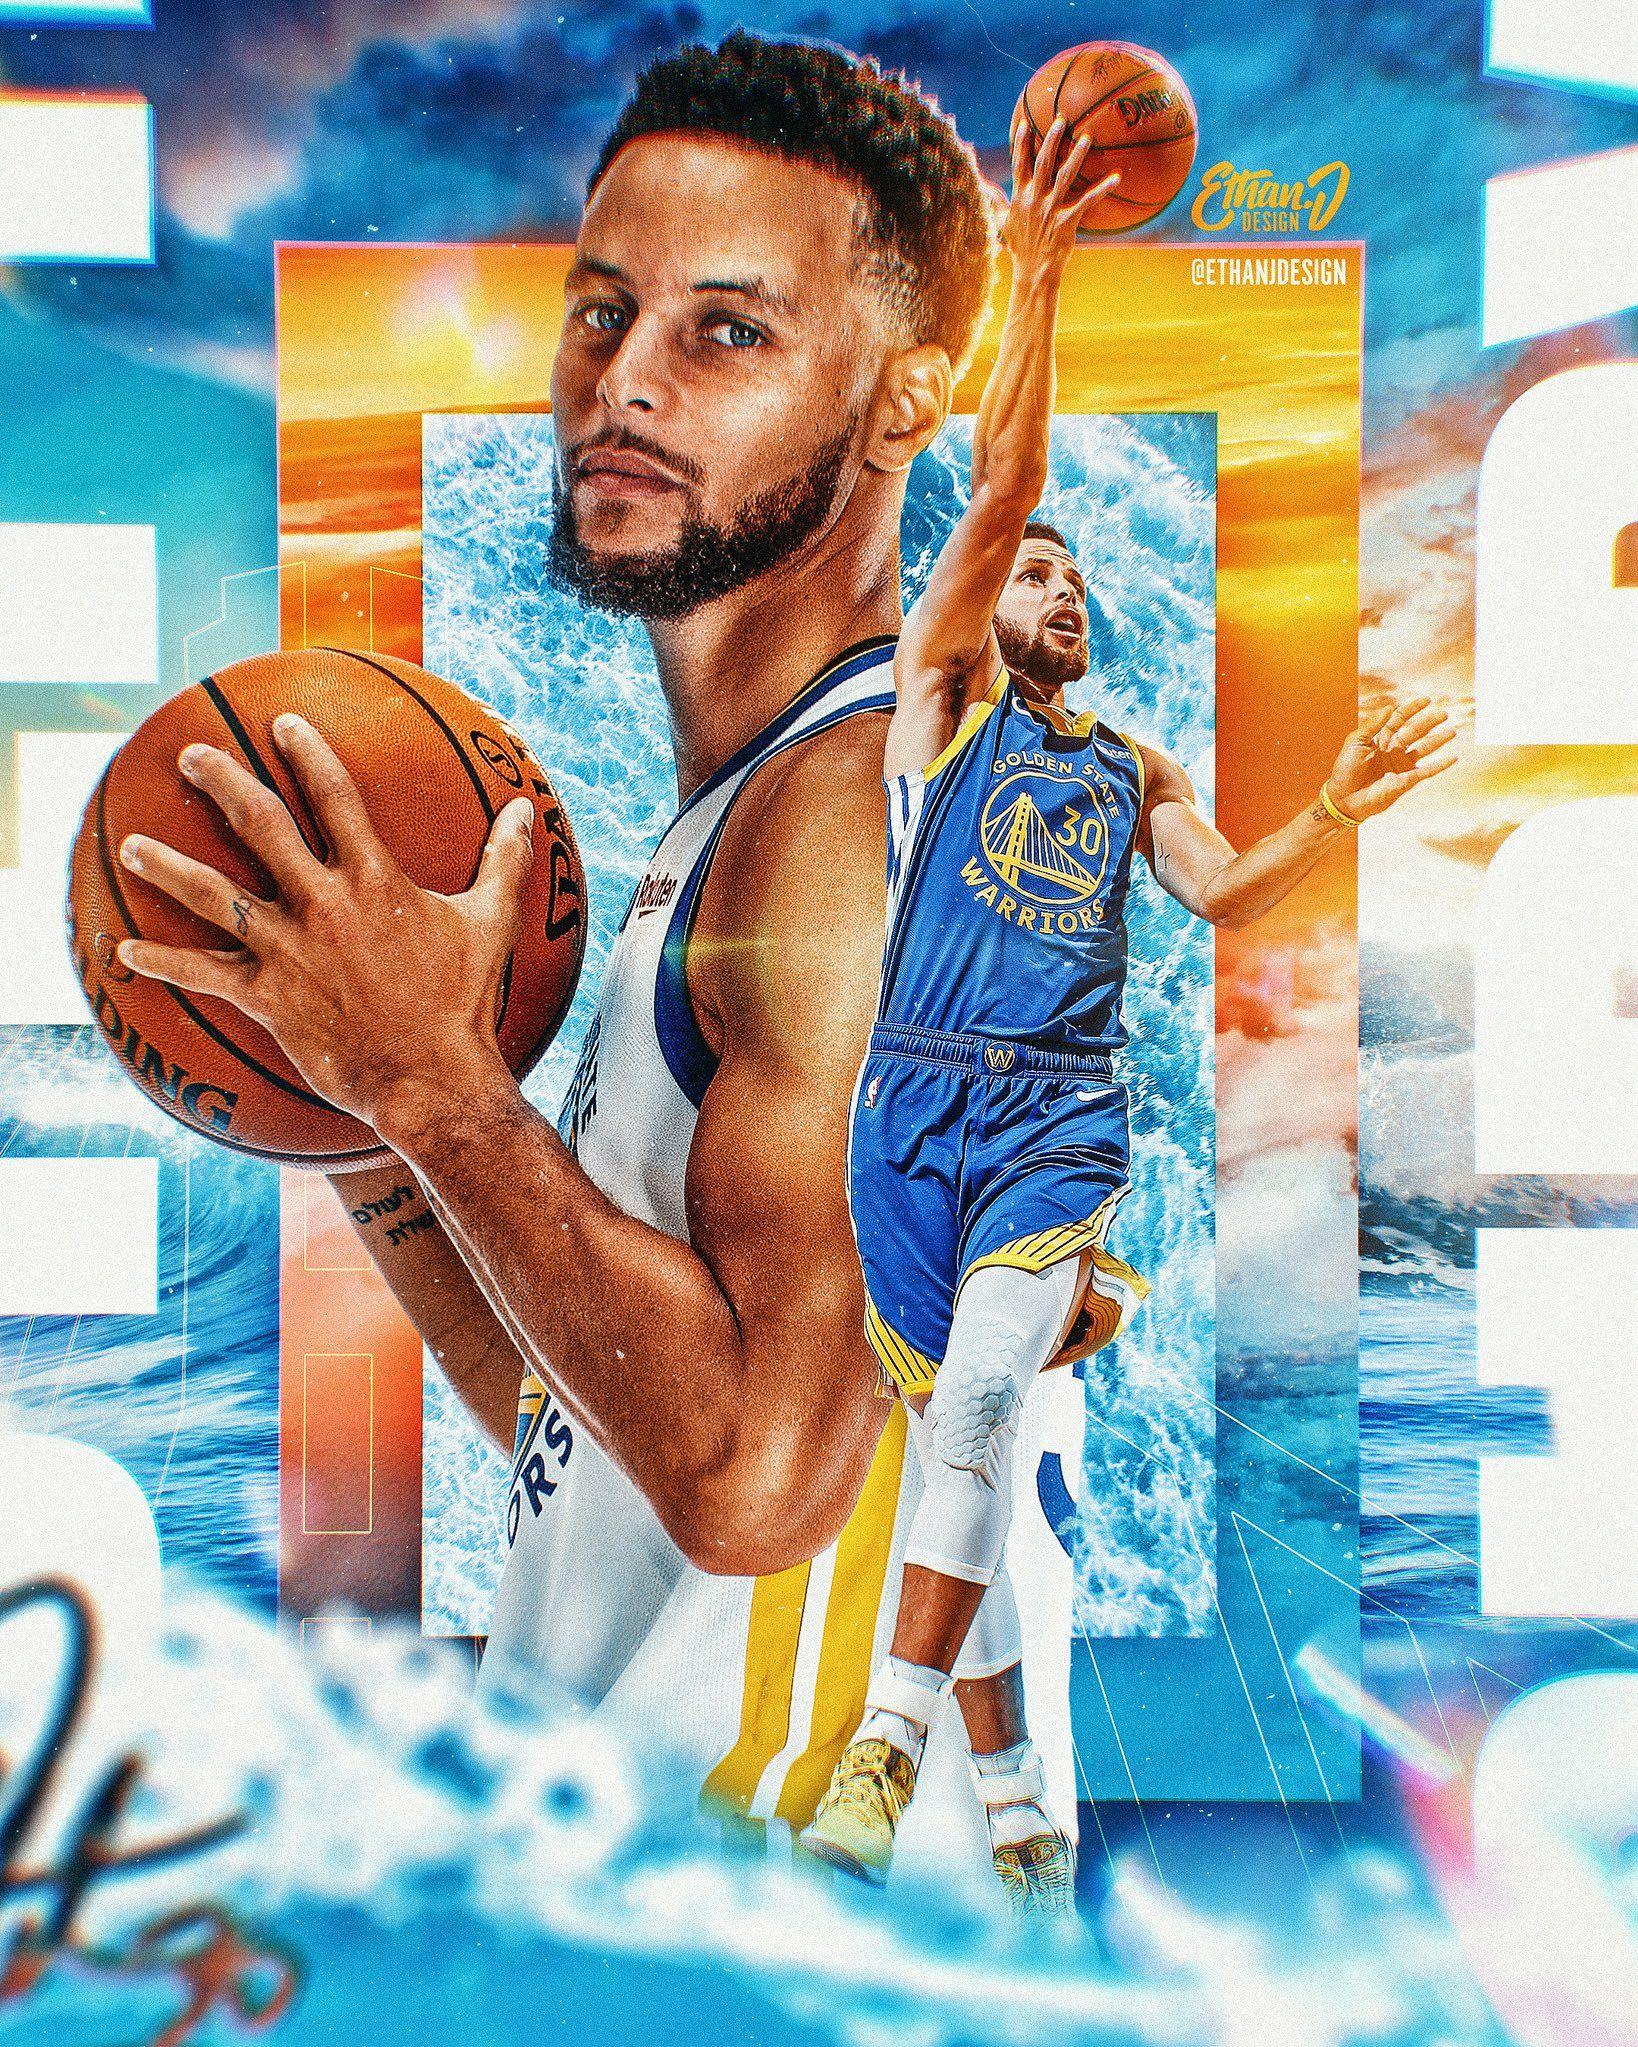 Lucie Camp On Design Sports Advertising Steph Curry